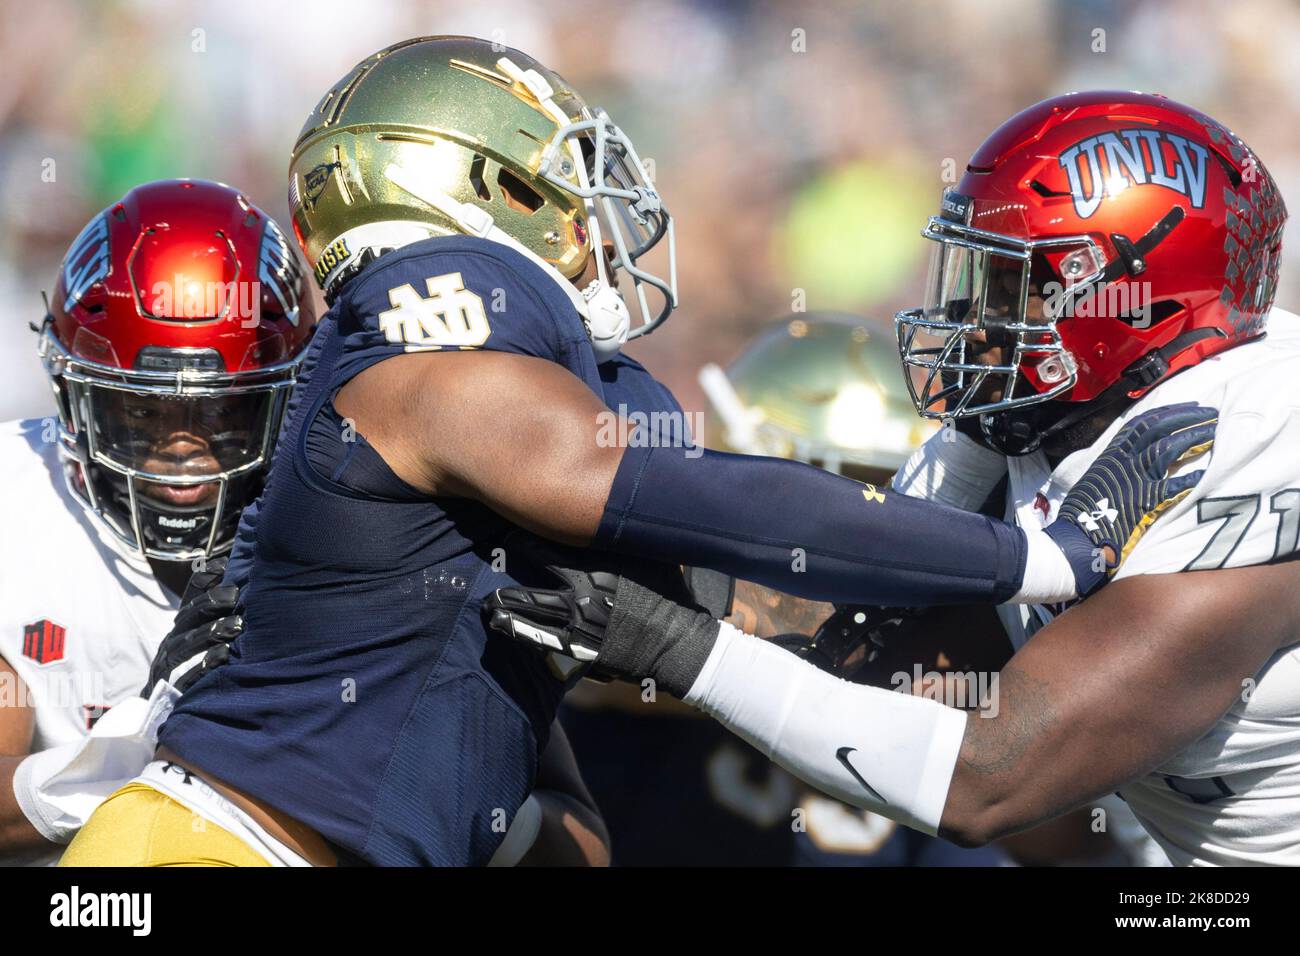 South Bend, Indiana, USA. 22nd Oct, 2022. UNLV offensive lineman Daviyon McDaniel (71) and Notre Dame defensive lineman Justin Ademilola (9) battle at the line of scrimmage during NCAA football game action between the UNLV Rebels and the Notre Dame Fighting Irish at Notre Dame Stadium in South Bend, Indiana. Notre Dame defeated UNLV 44-21. John Mersits/CSM/Alamy Live News Stock Photo